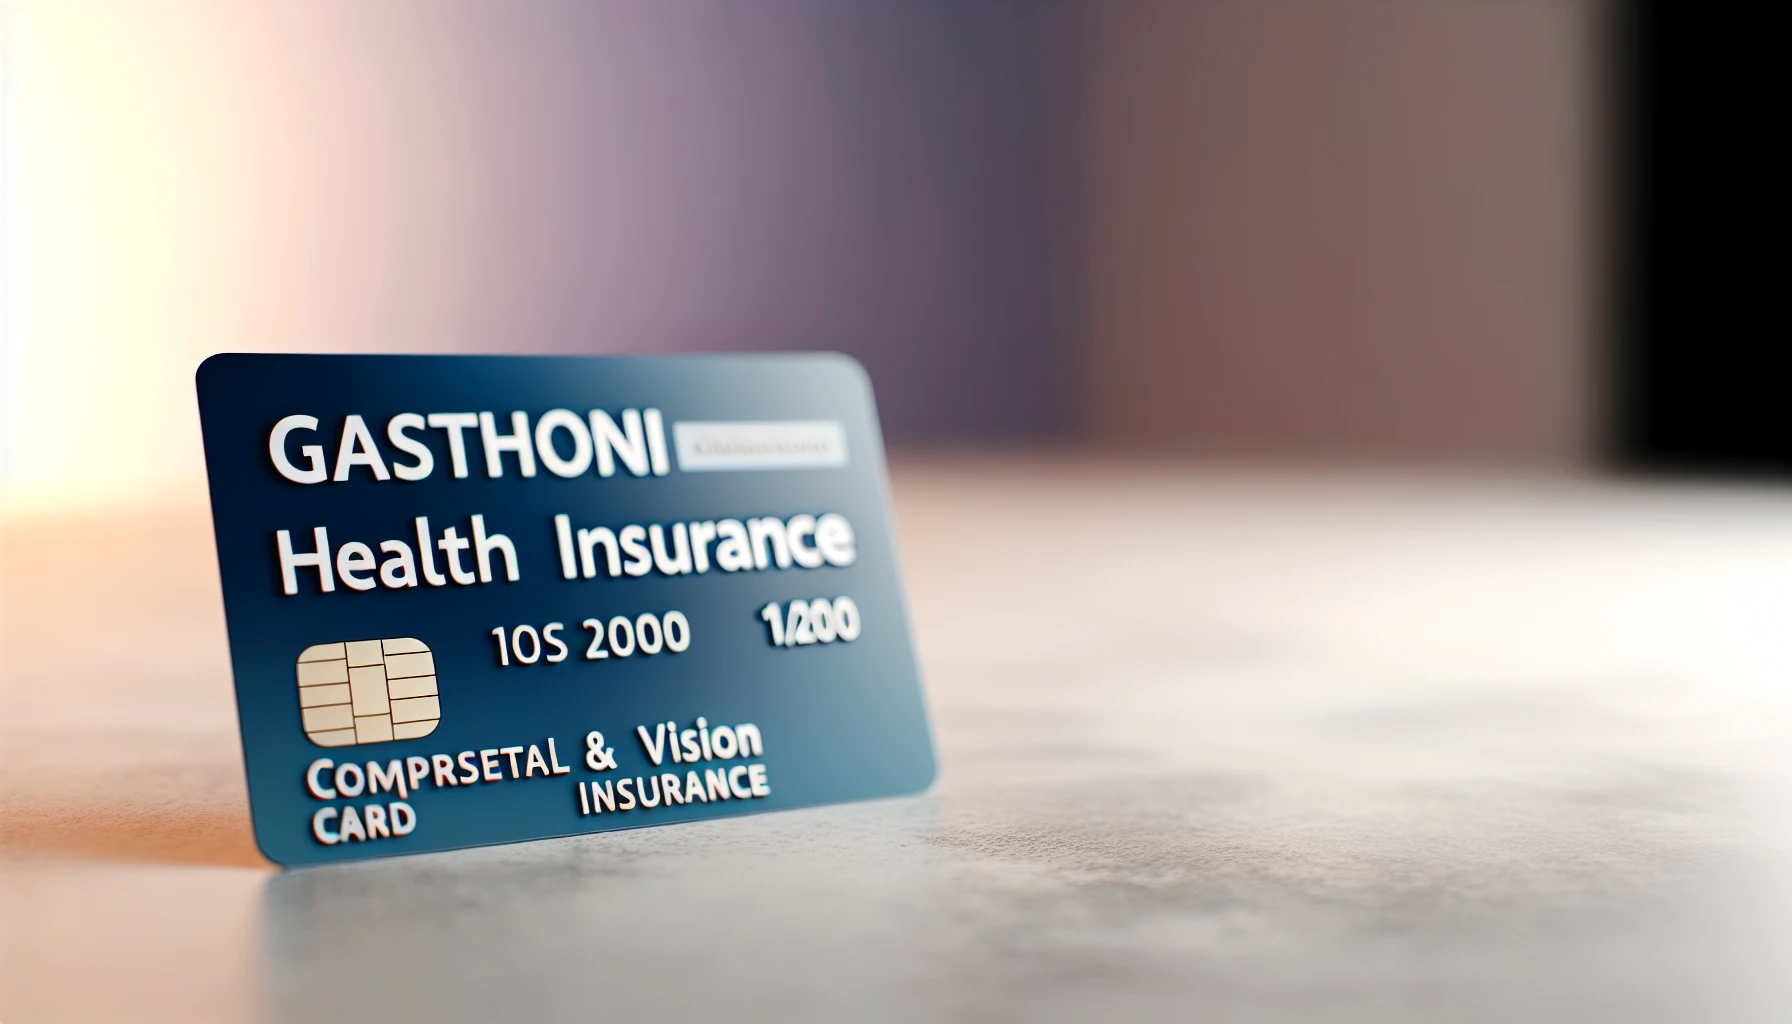 A dental and vision insurance card with the text 'Health Insurance' visible, representing the comprehensive health insurance plans in Gastonia.